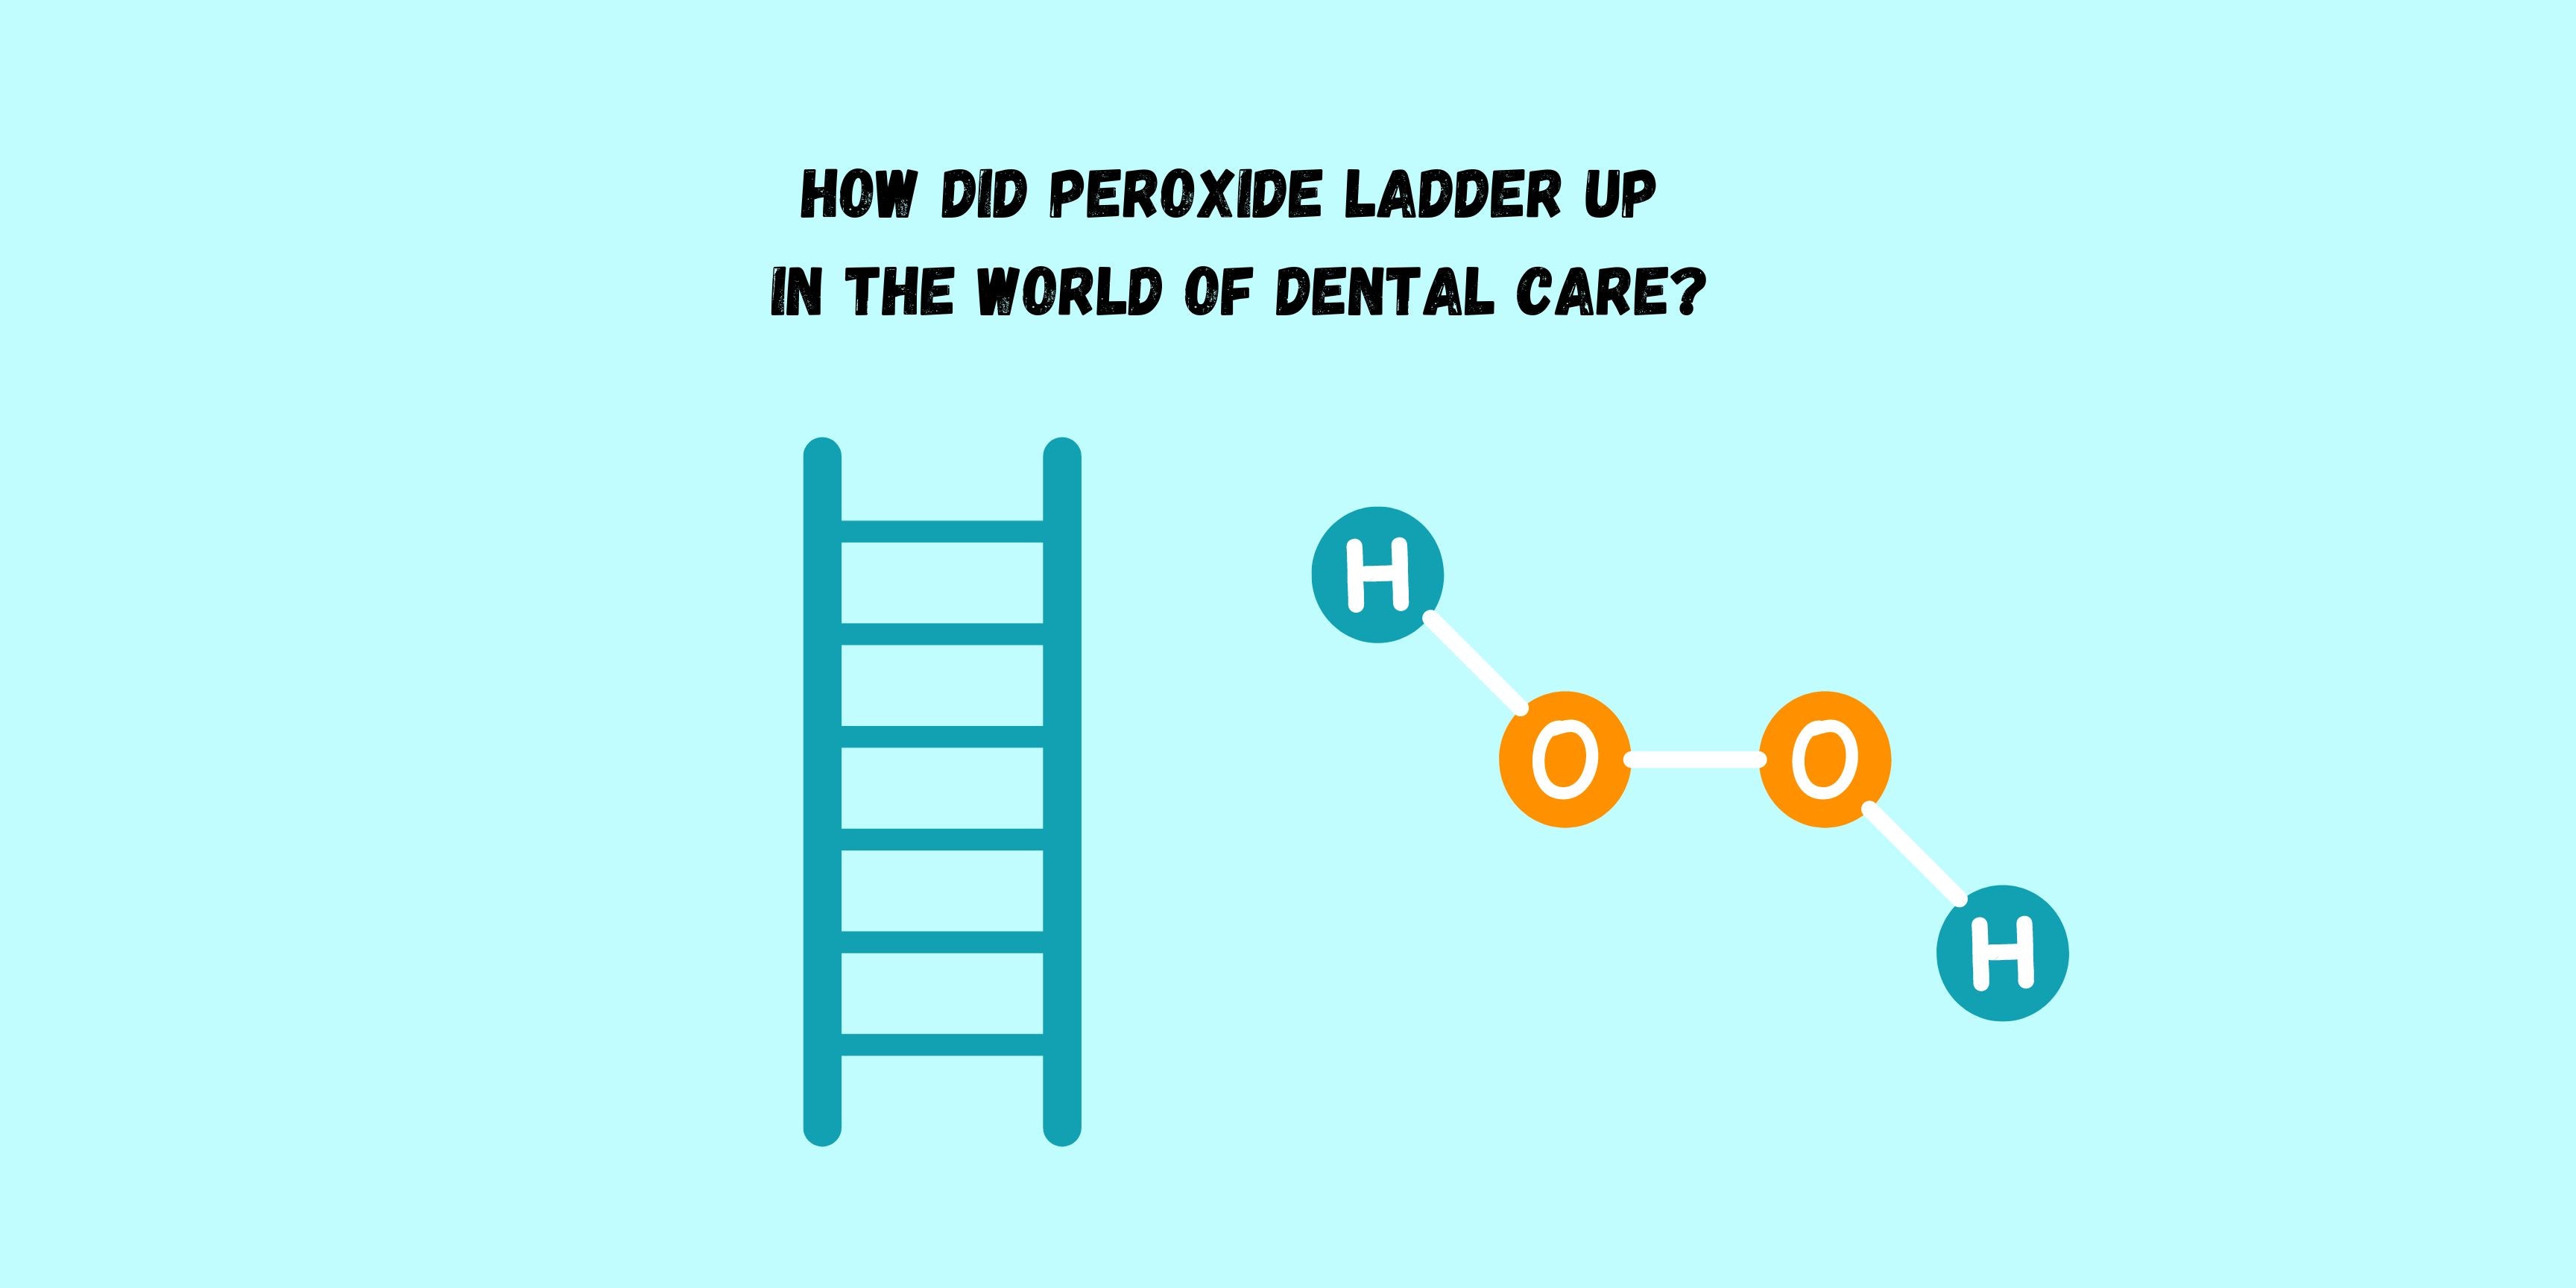 How did peroxide ladder up in the world of dental care